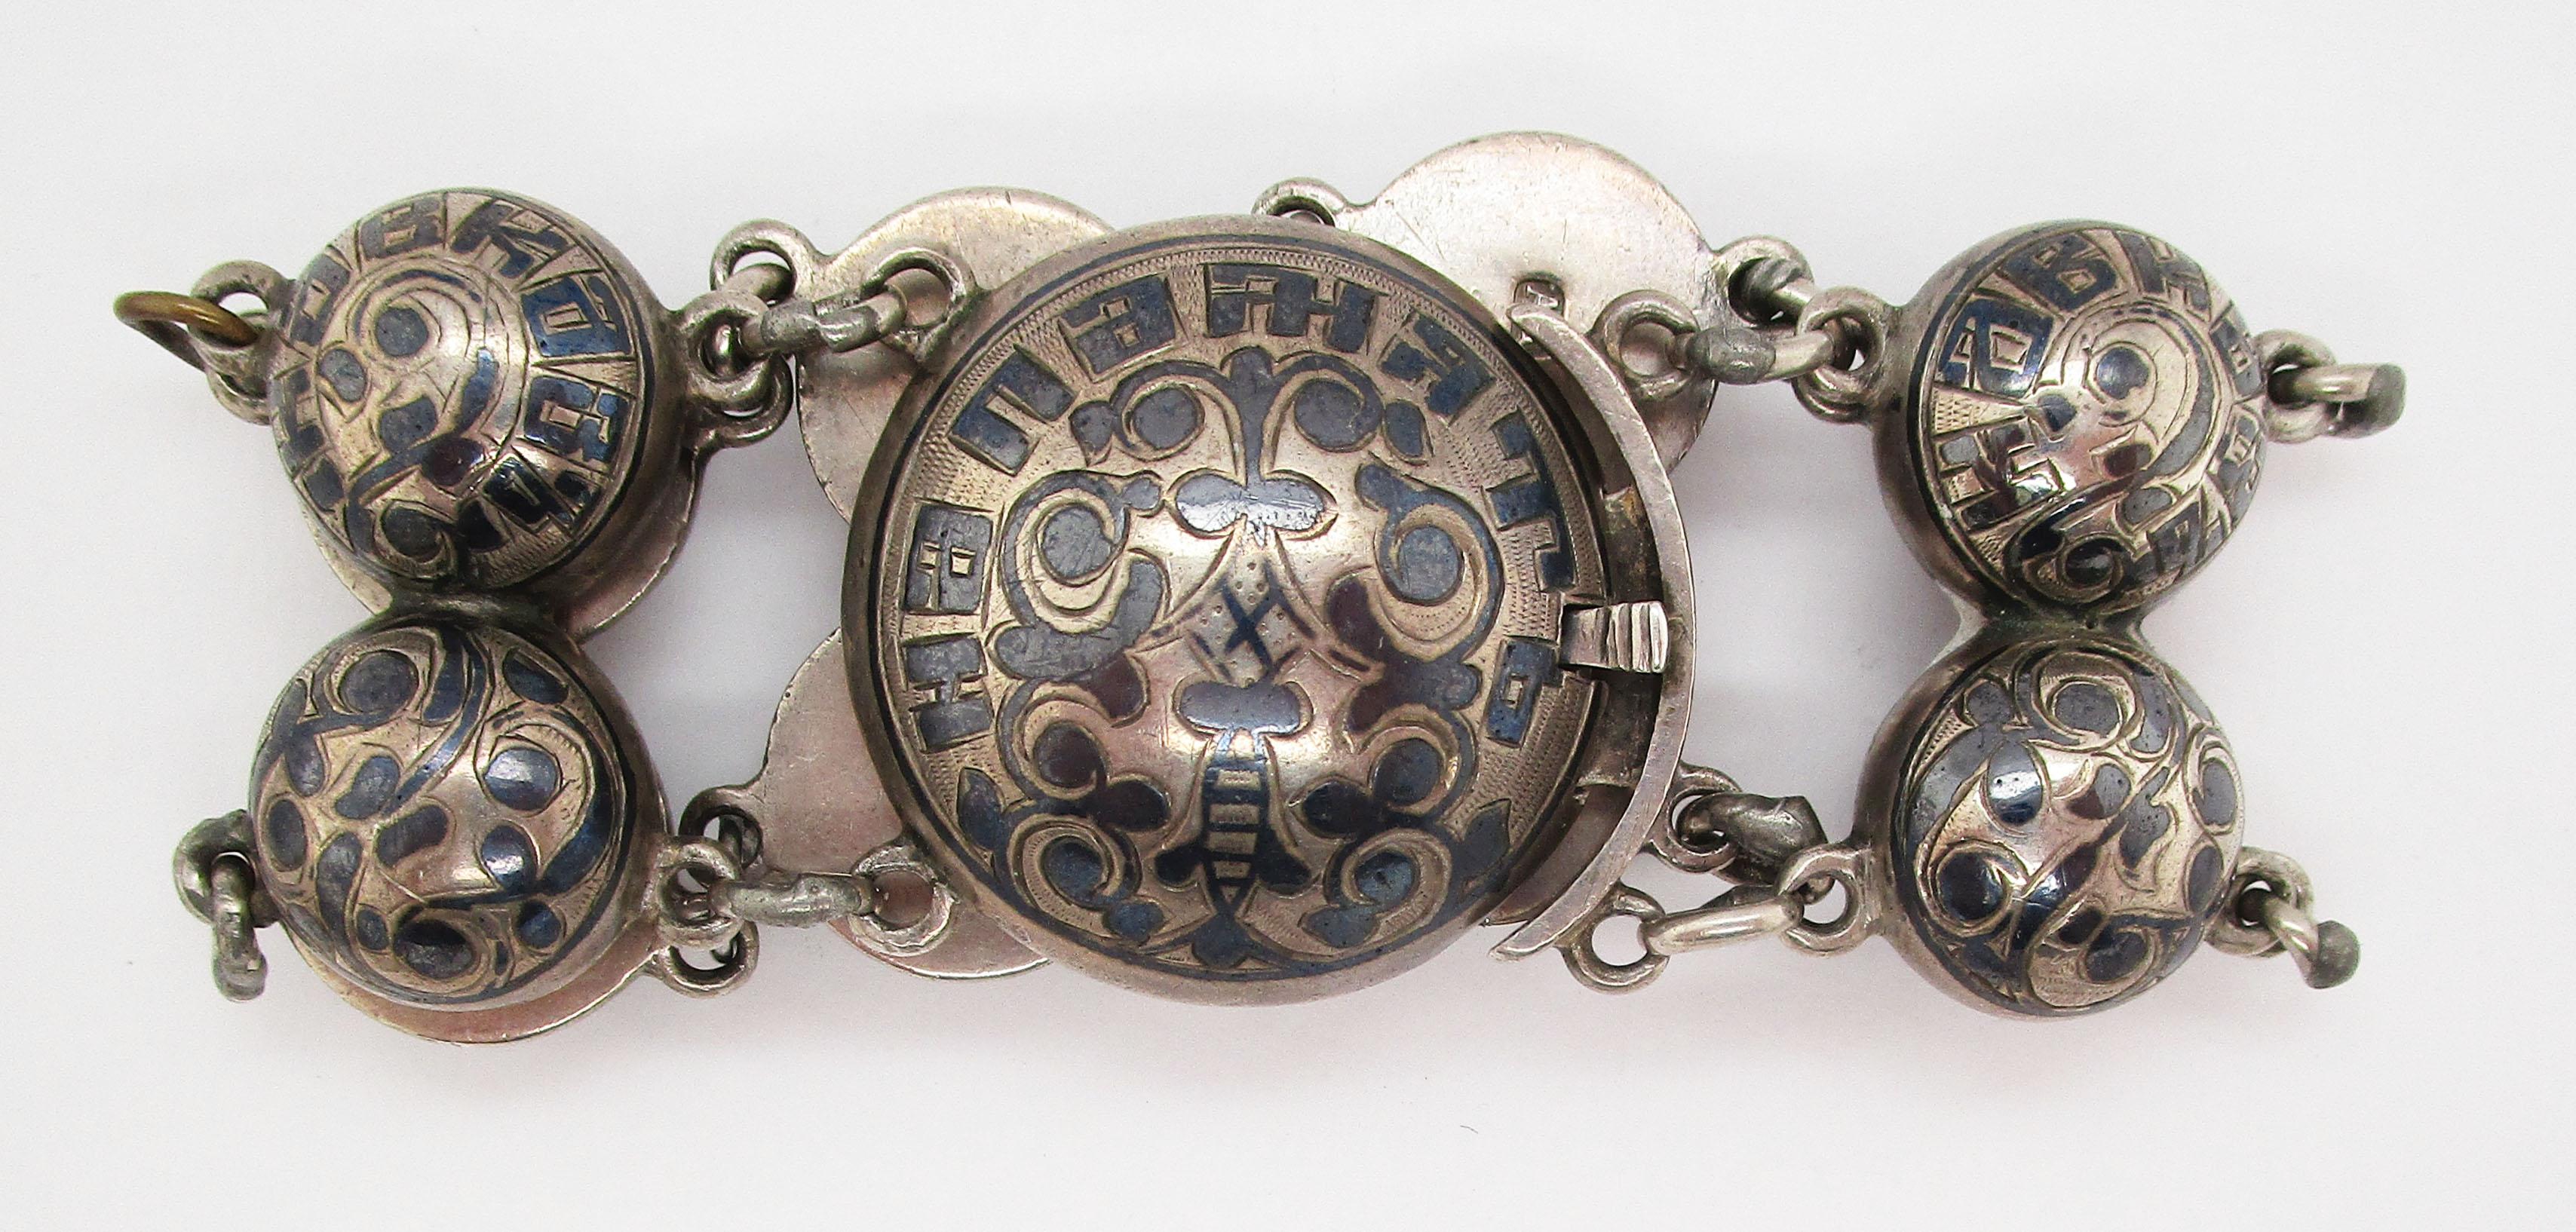 This is an incredibly unique Russian bracelet from the Victorian era in sterling silver and black enamel. The enamel work is incredibly detailed and features swirled patterns that create a dramatic contrast against the brightness of the silver. The